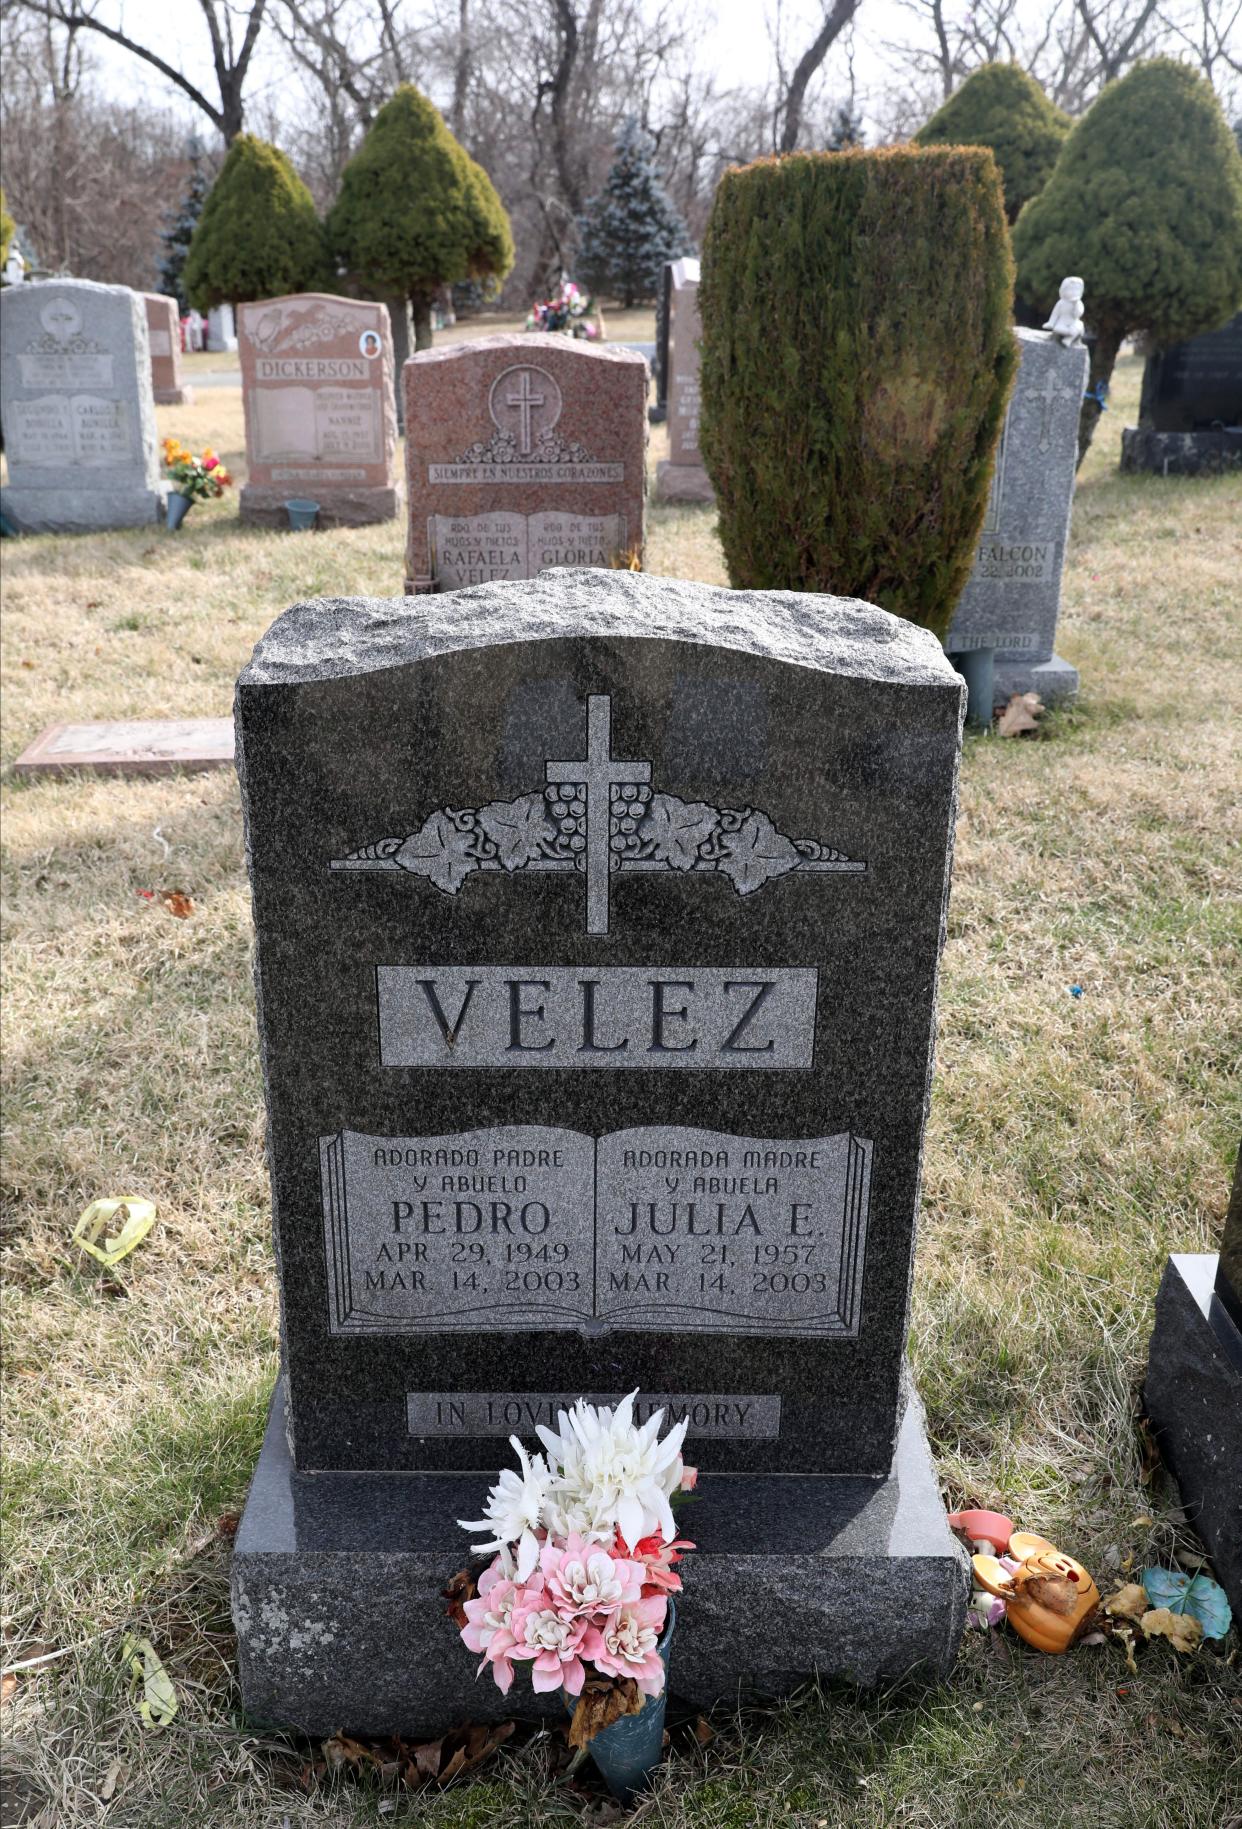 The gravestone for Pedro and Julia E. Velez is pictured at Oakland cemetery in Yonkers, Feb. 7, 2023.